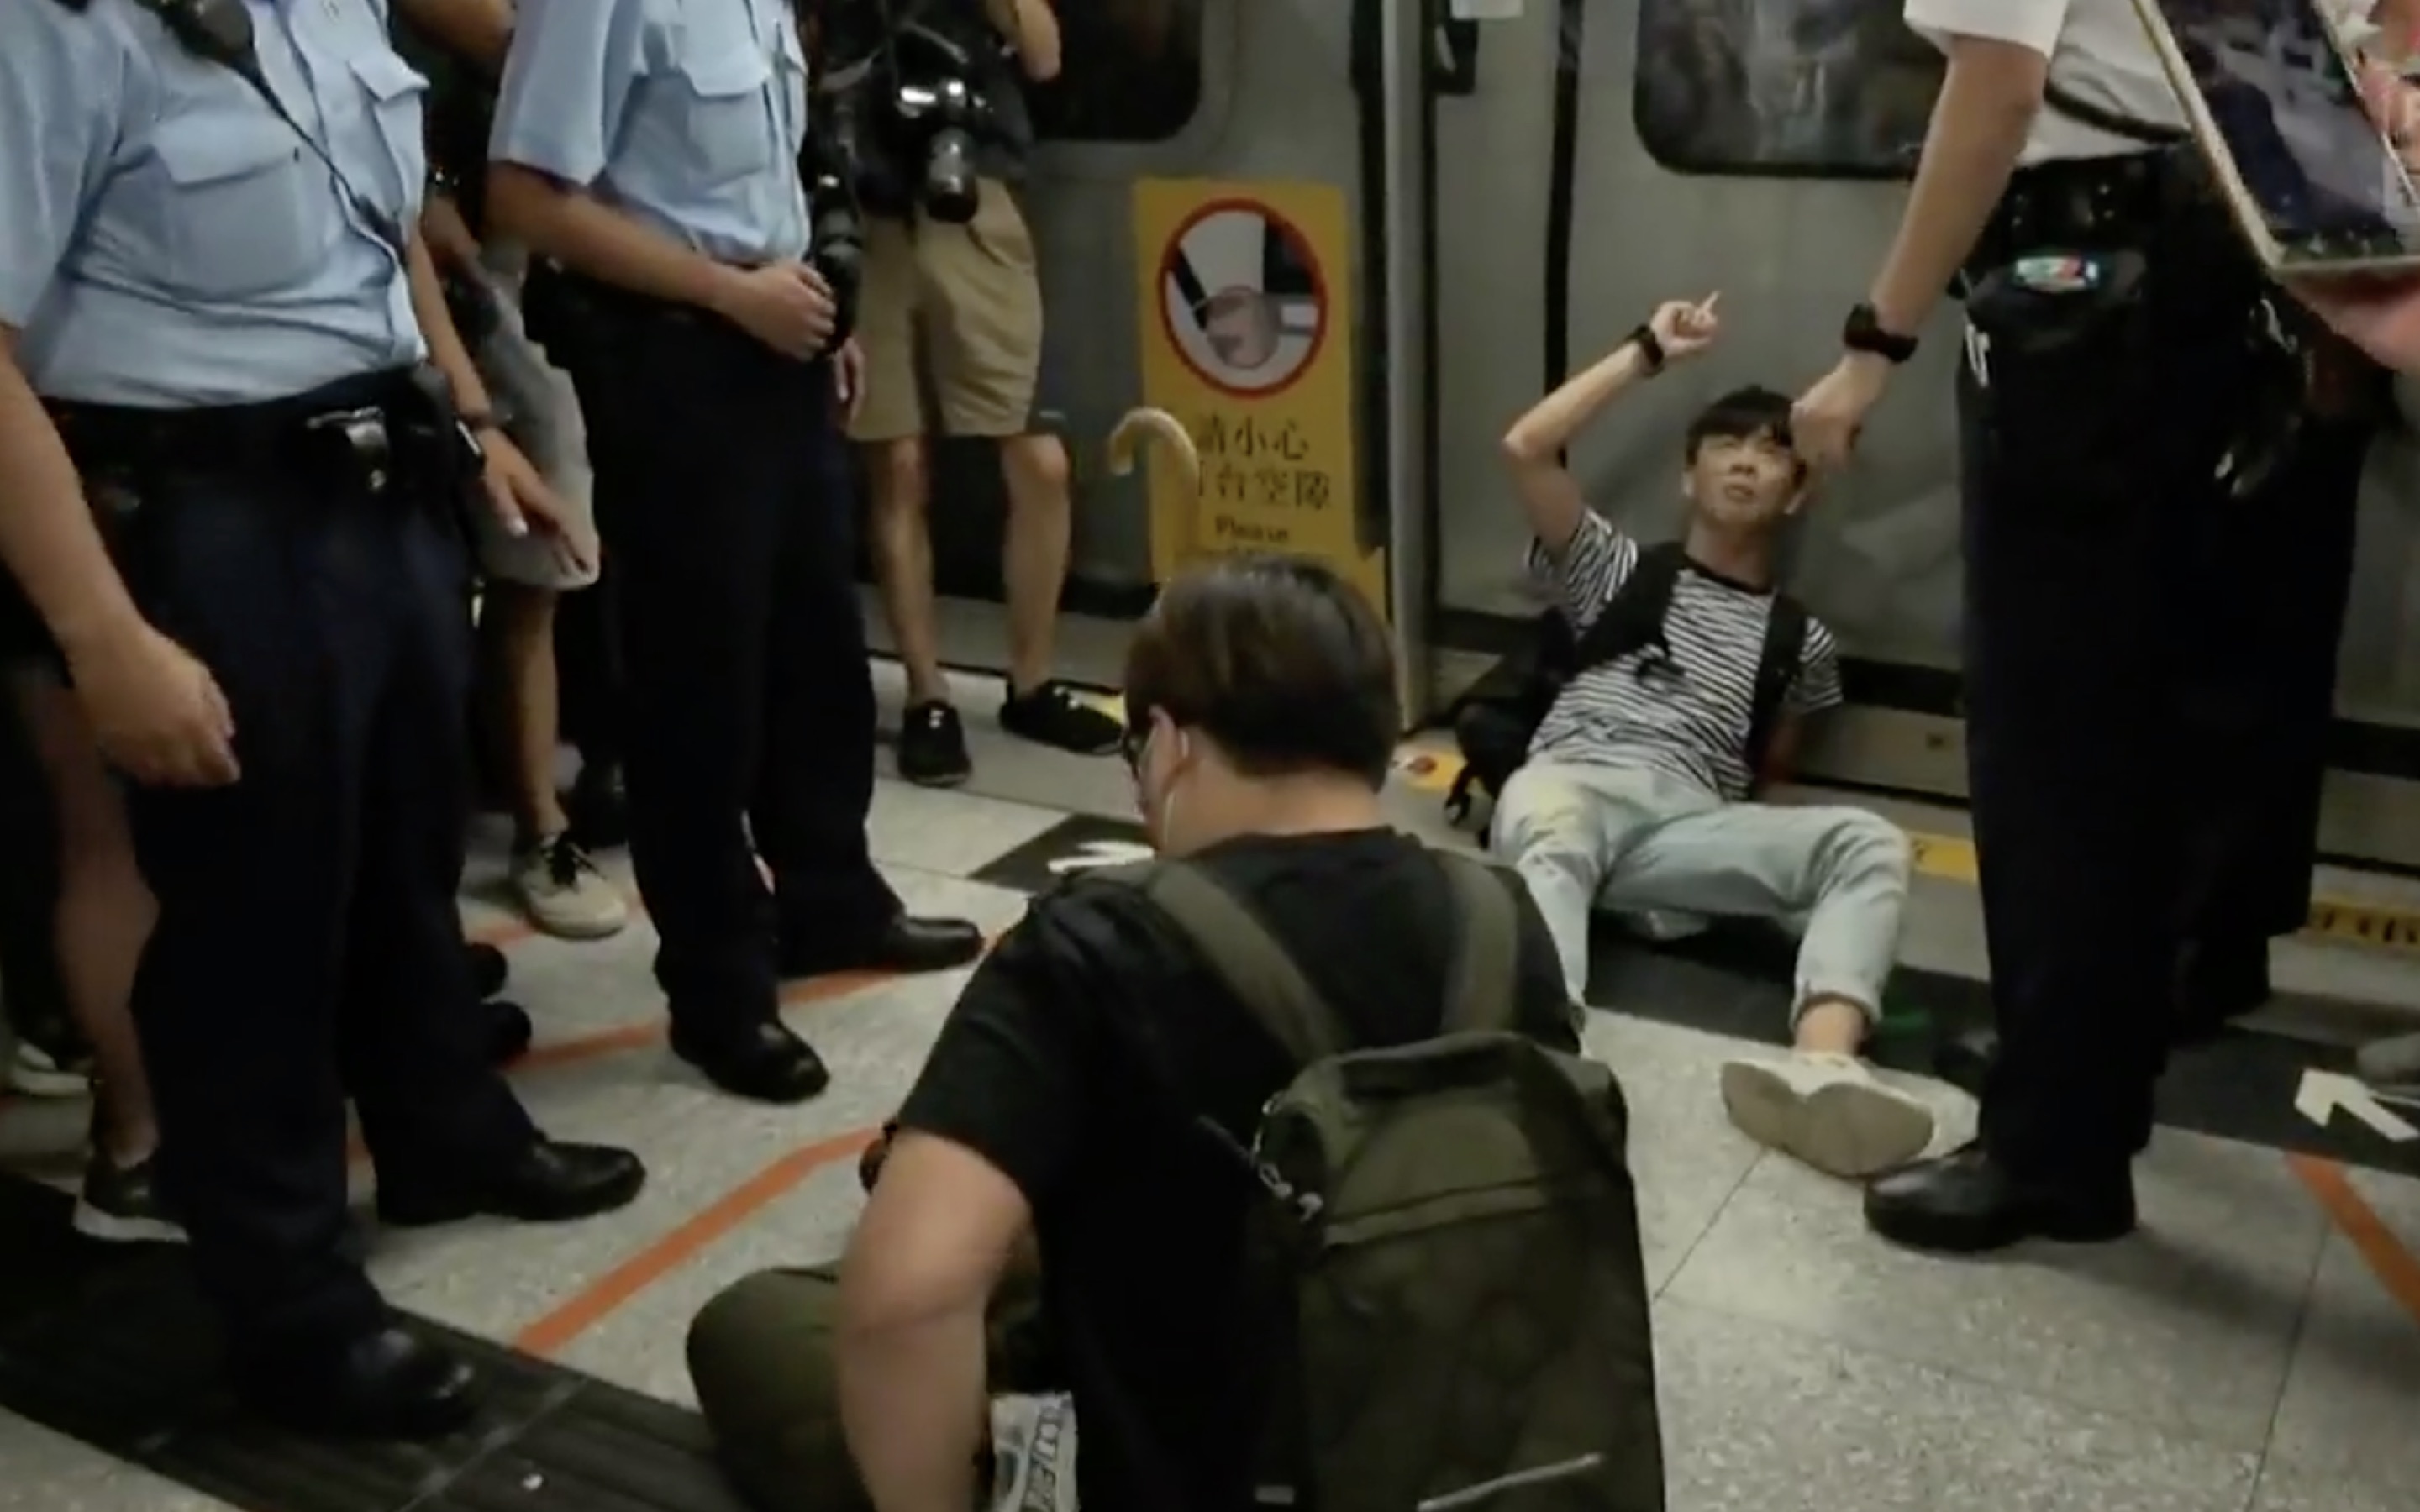 A young protester blocks an MTR train door at Admiralty MTR station. Screengrab via Facebook video/RTHK.